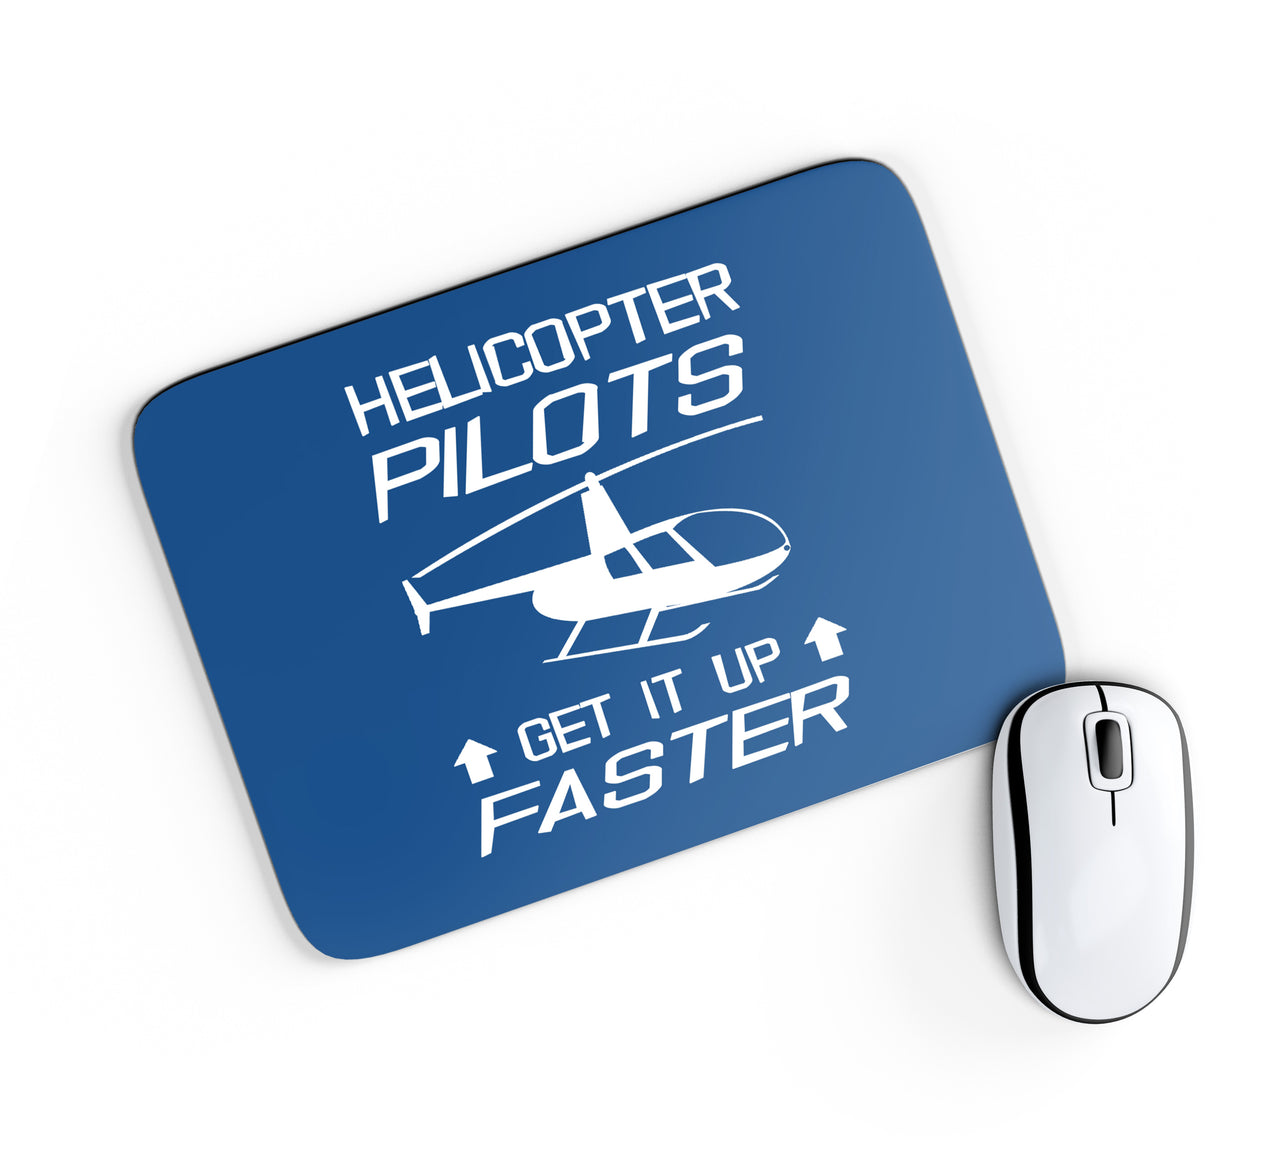 Helicopter Pilots Get It Up Faster Designed Mouse Pads